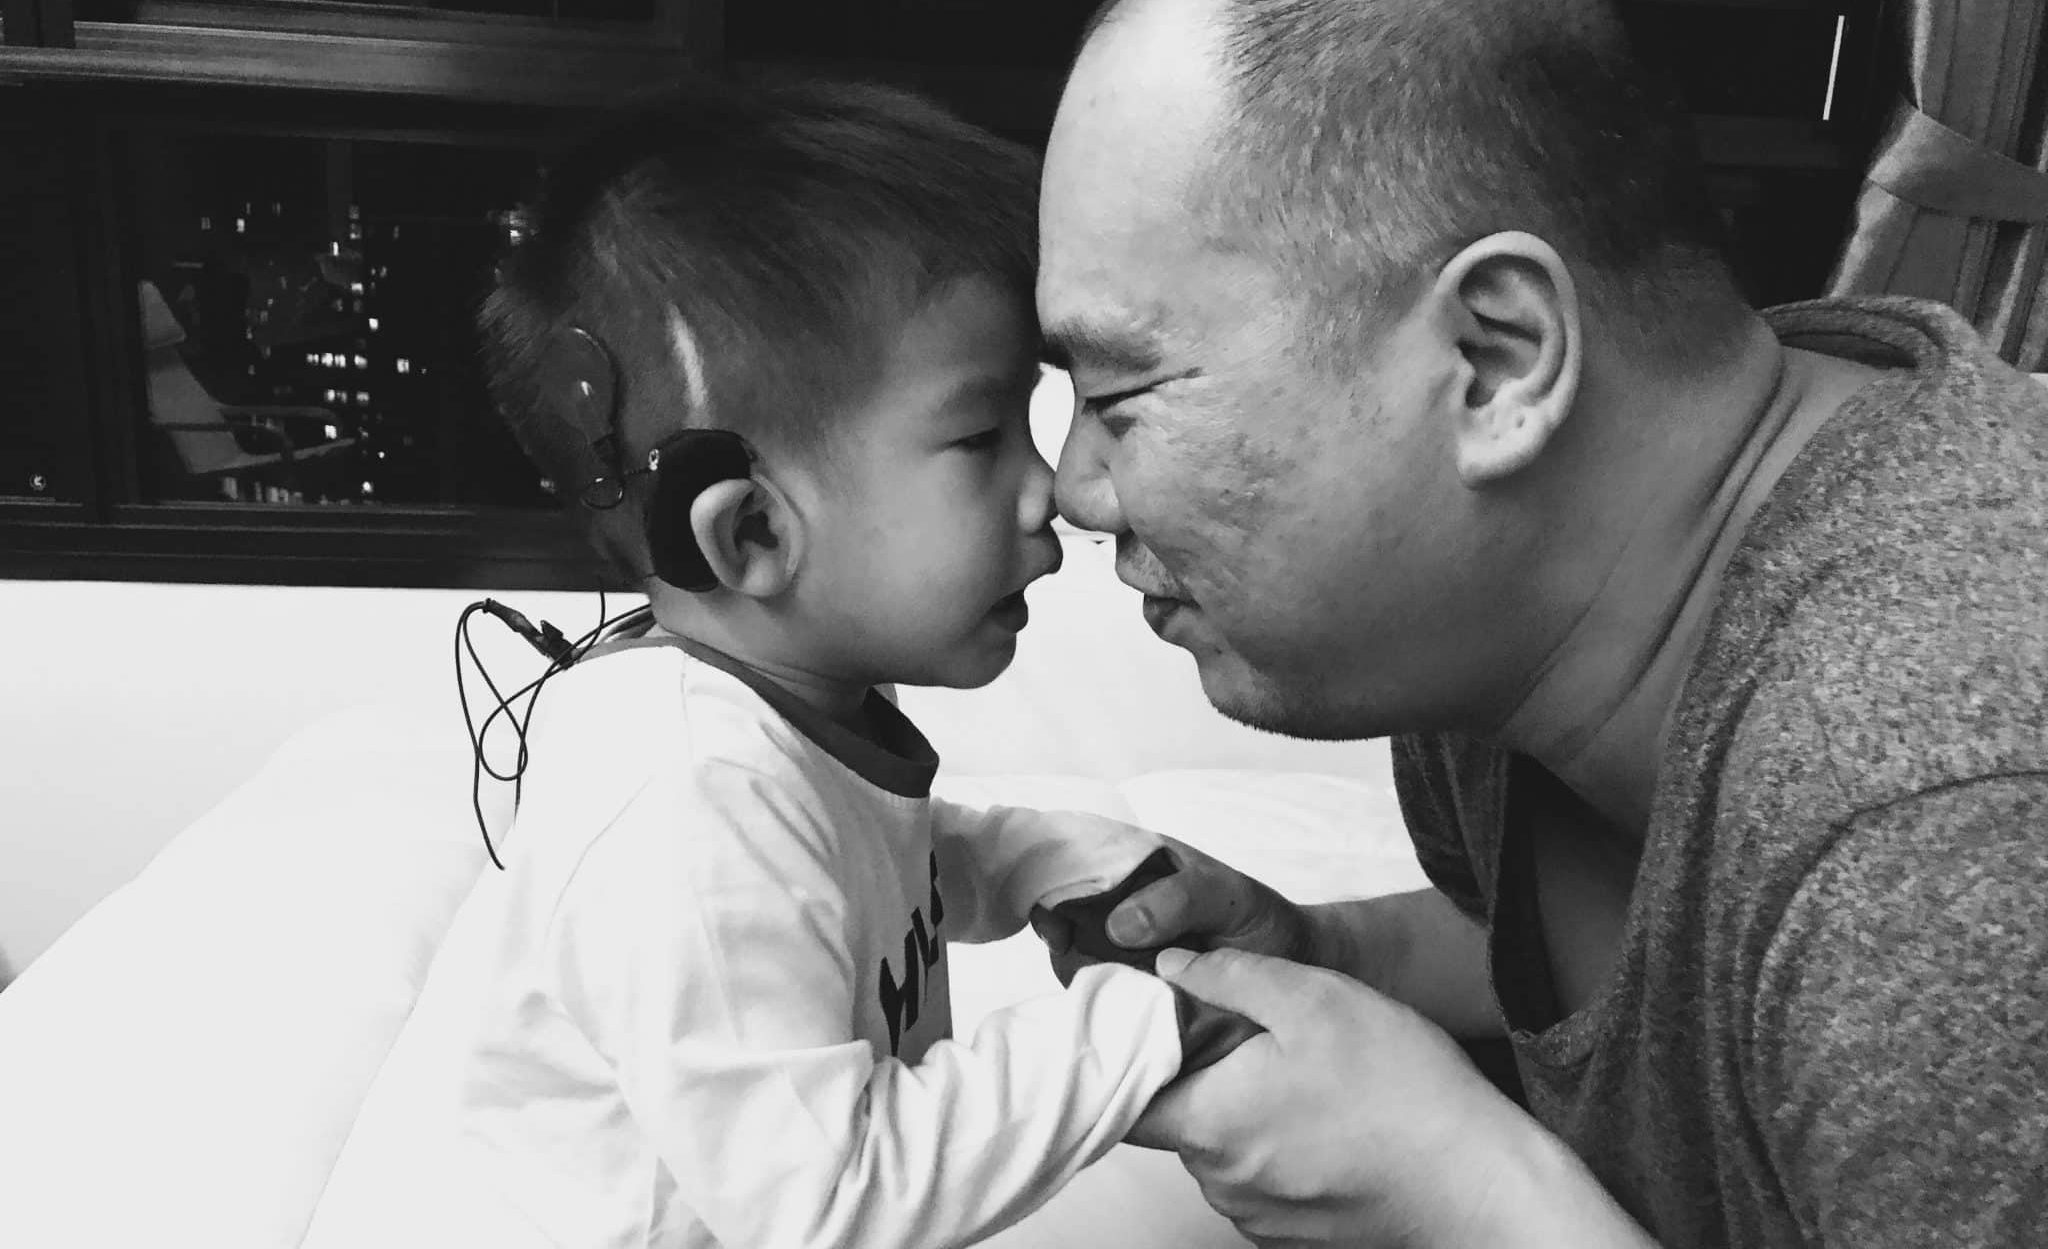 “It was a miracle when he called me ‘Pa’”: Father whose son was born deaf